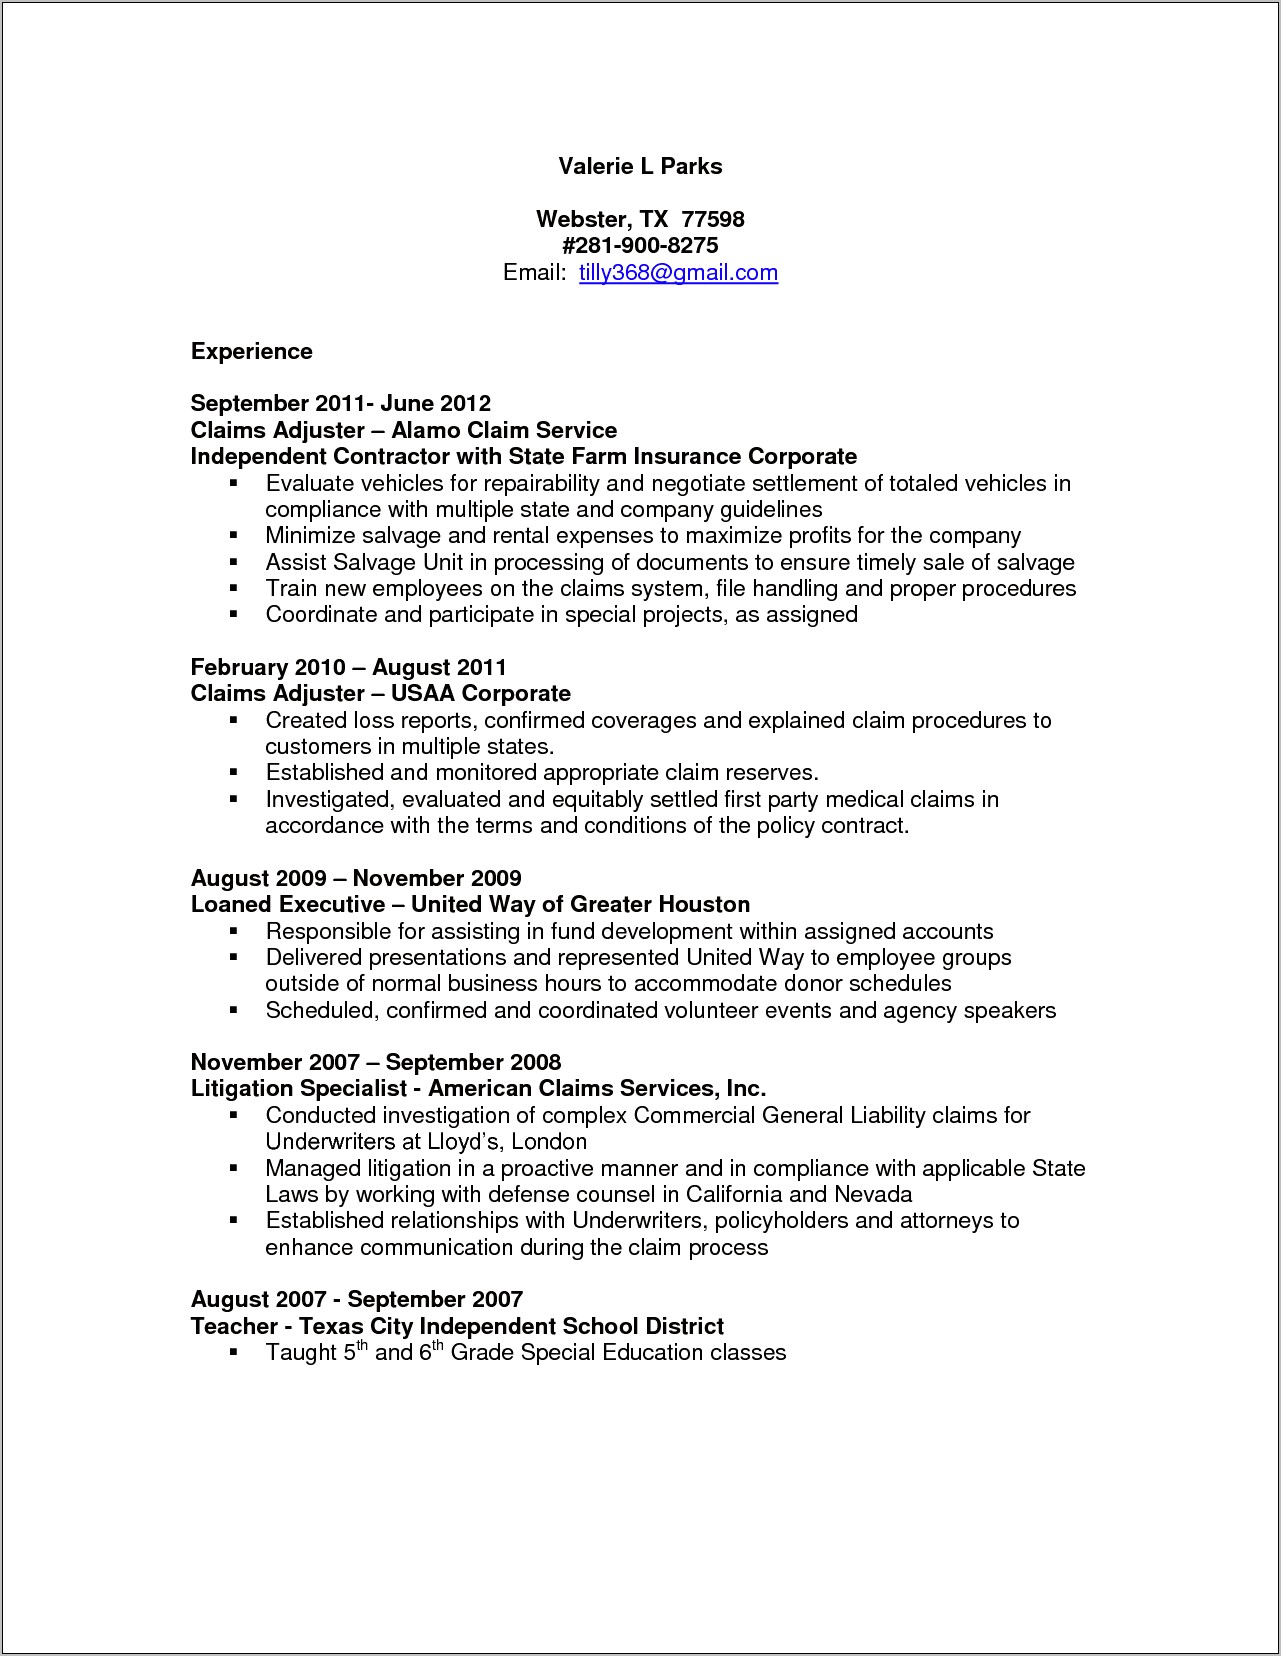 Resume Objective For Property Claims Adjuster